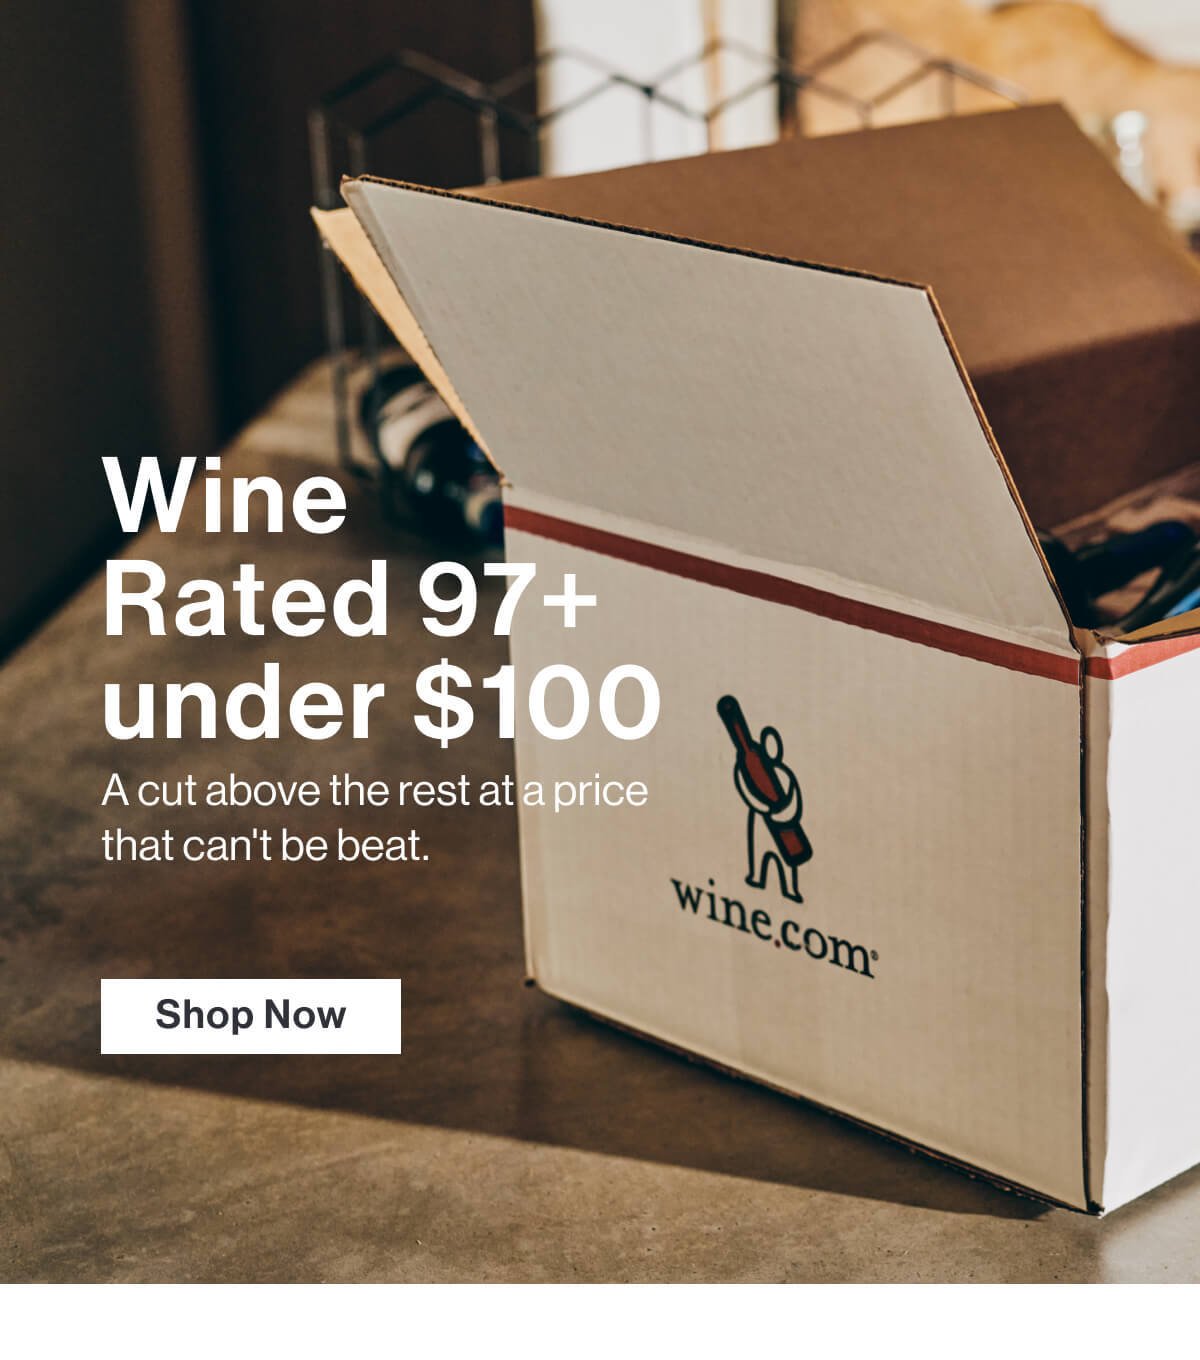 Wine Rated 97+ under $100 - a cut above the rest at a price that can't be beat - Shop Now